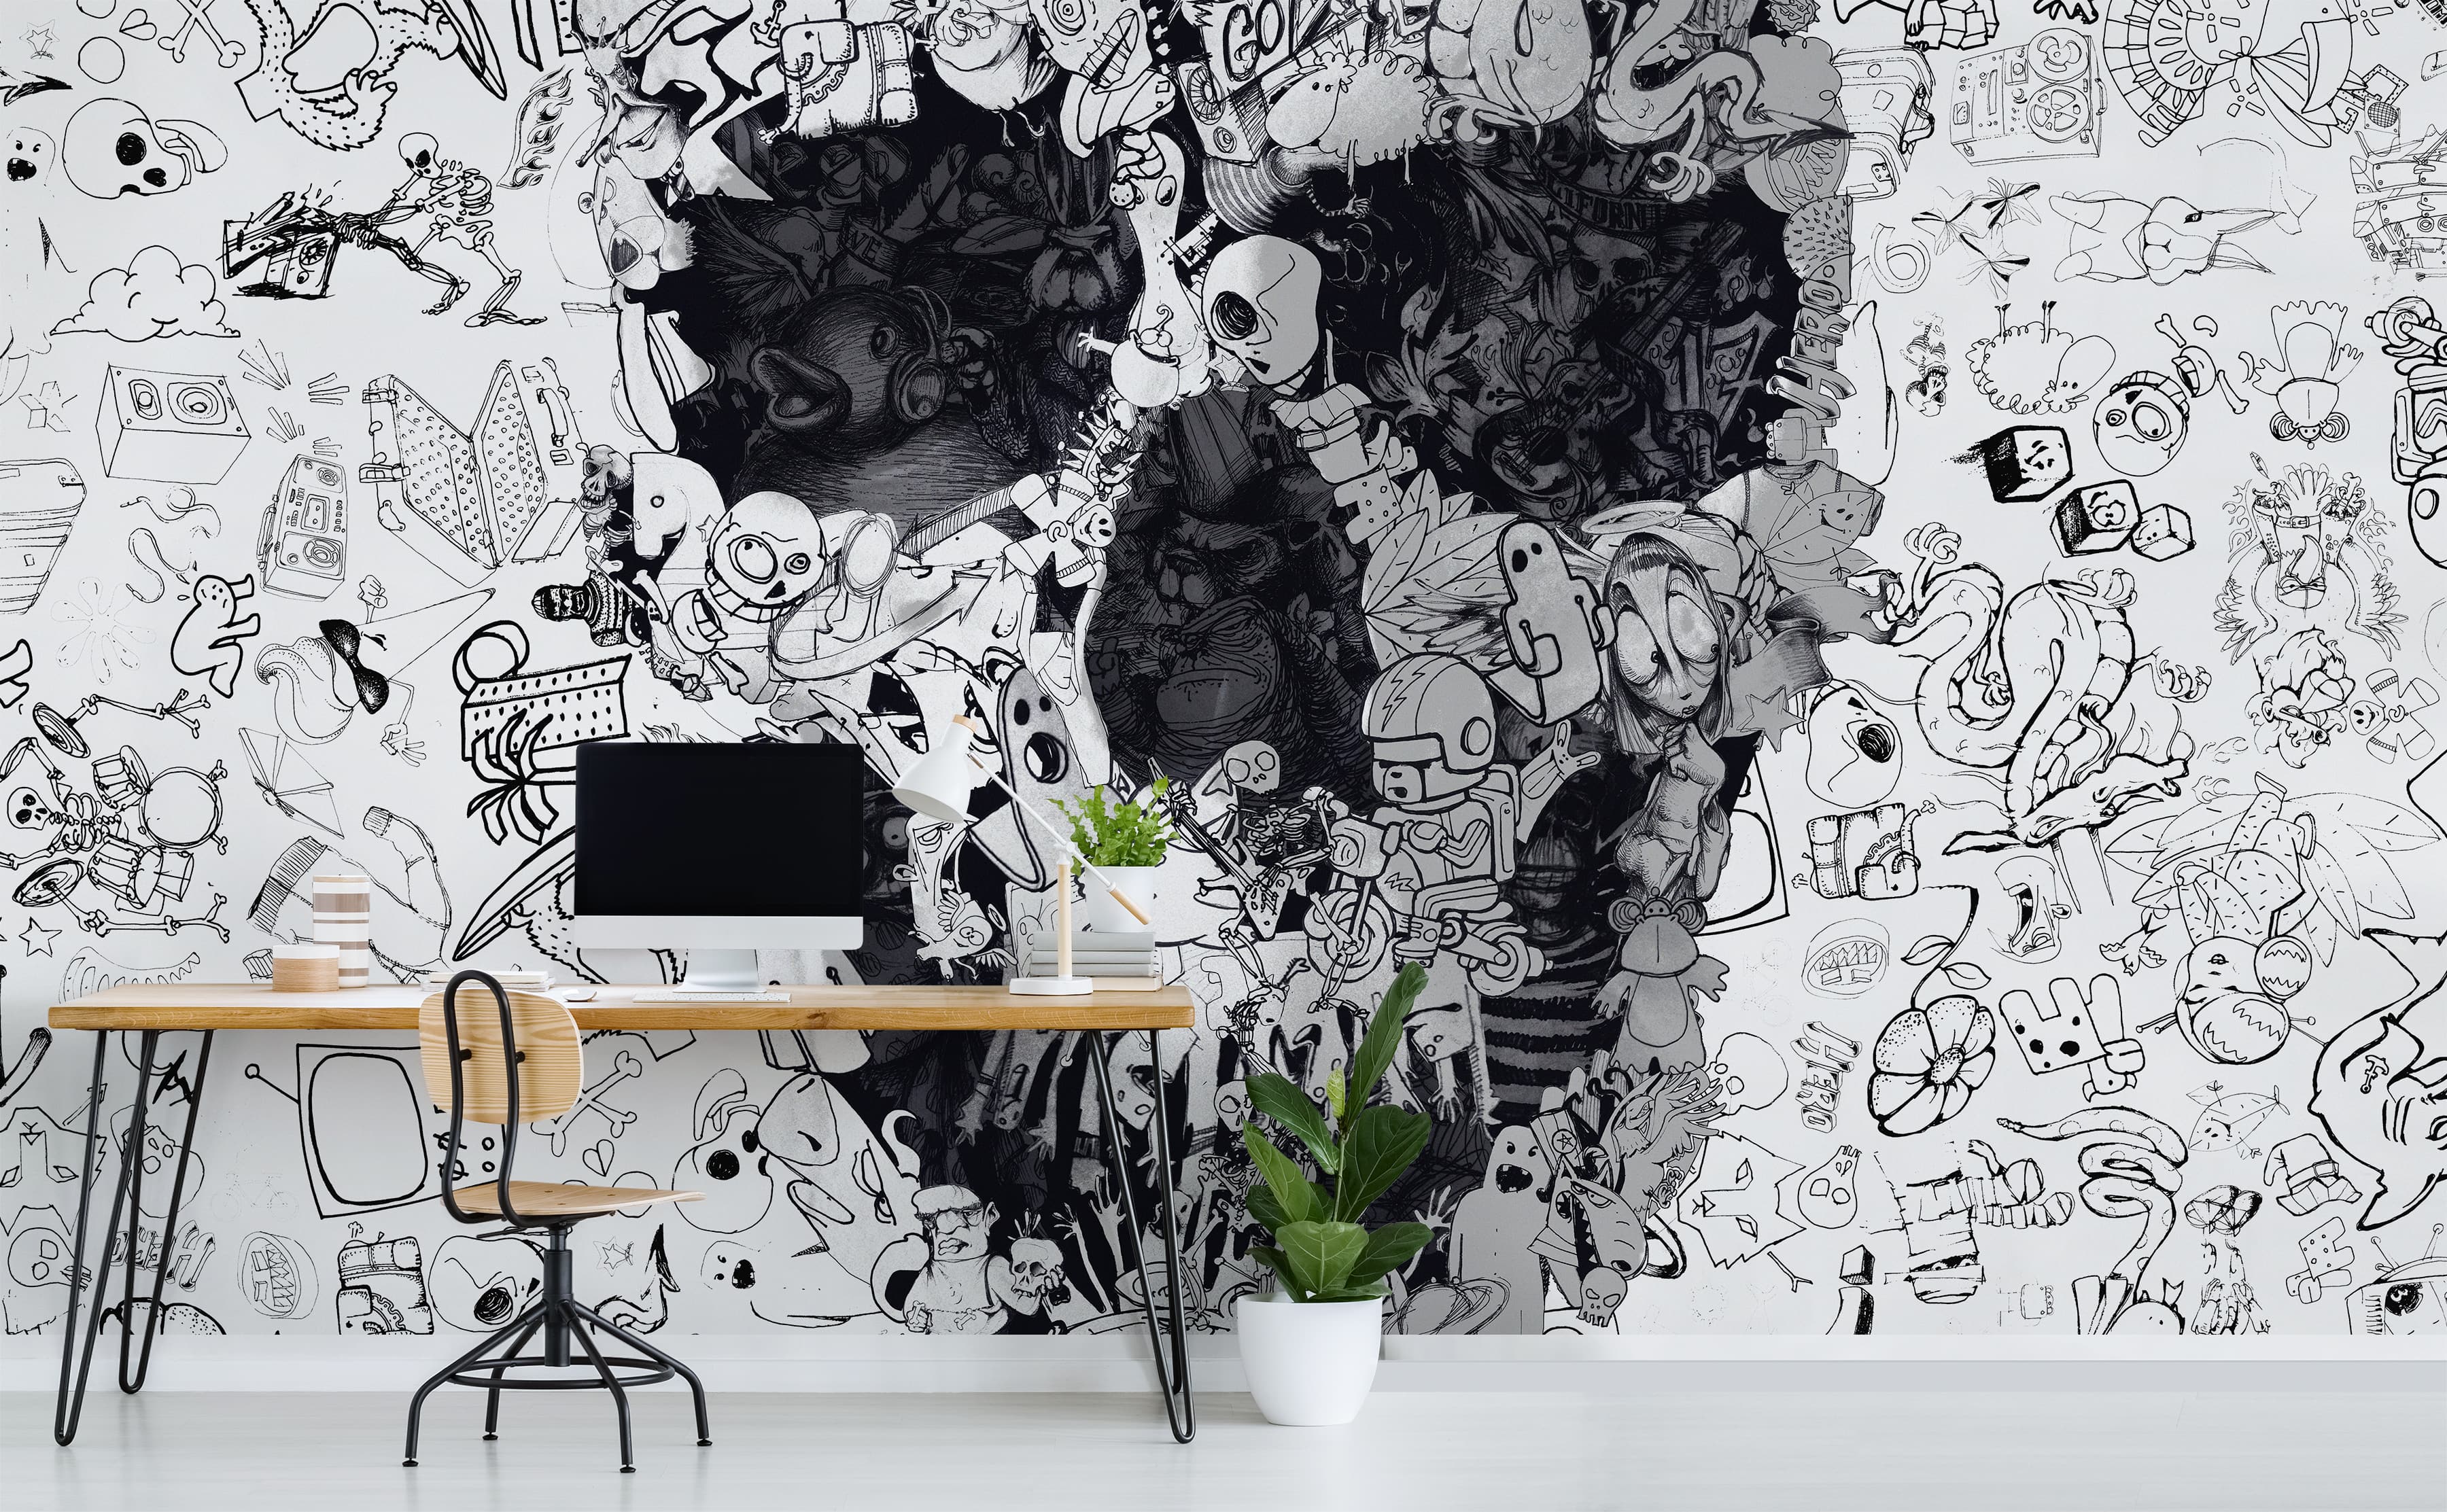 Black and White Wallpaper Peel and Stick Skull Floral Wall Paper for  Bedroom Adults 60 x 300cm White Skull Self Adhesive Wallpaper Vintage Vinyl  Black Gold Floral Patterned Sticky Back Plastic Roll 